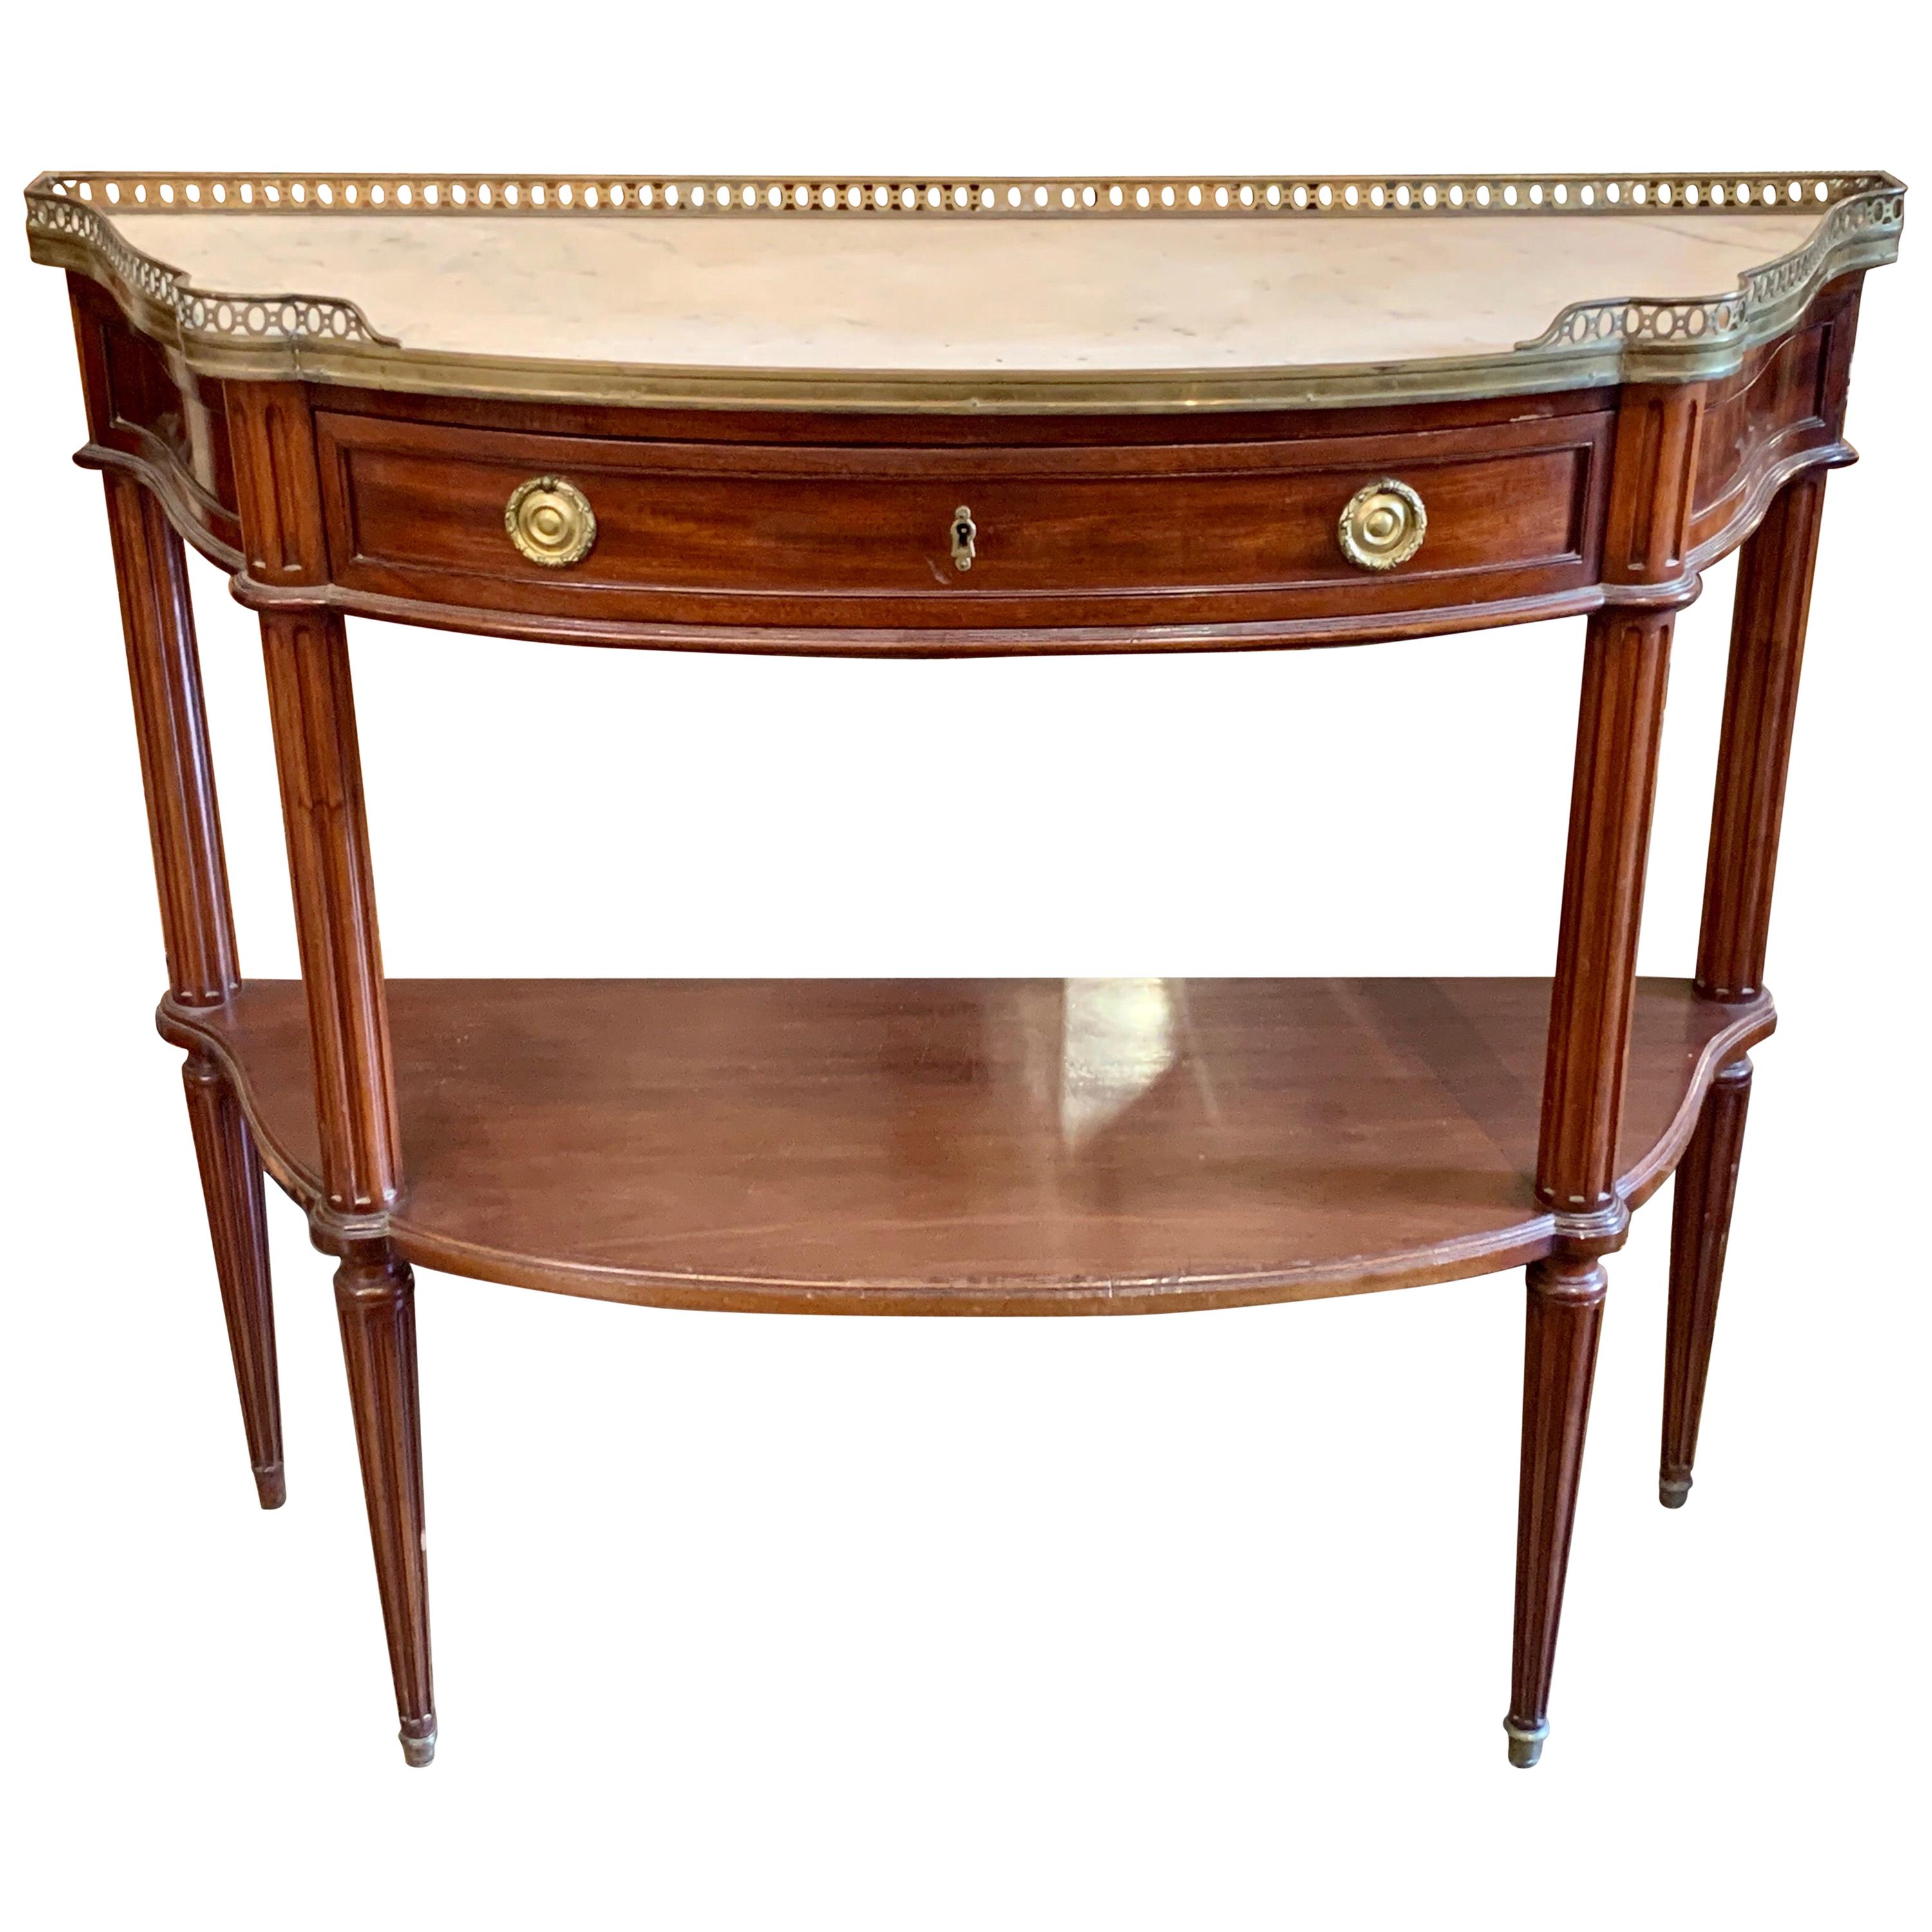 19th Century French Directoire Mahogany Console with Carrara Marble Top